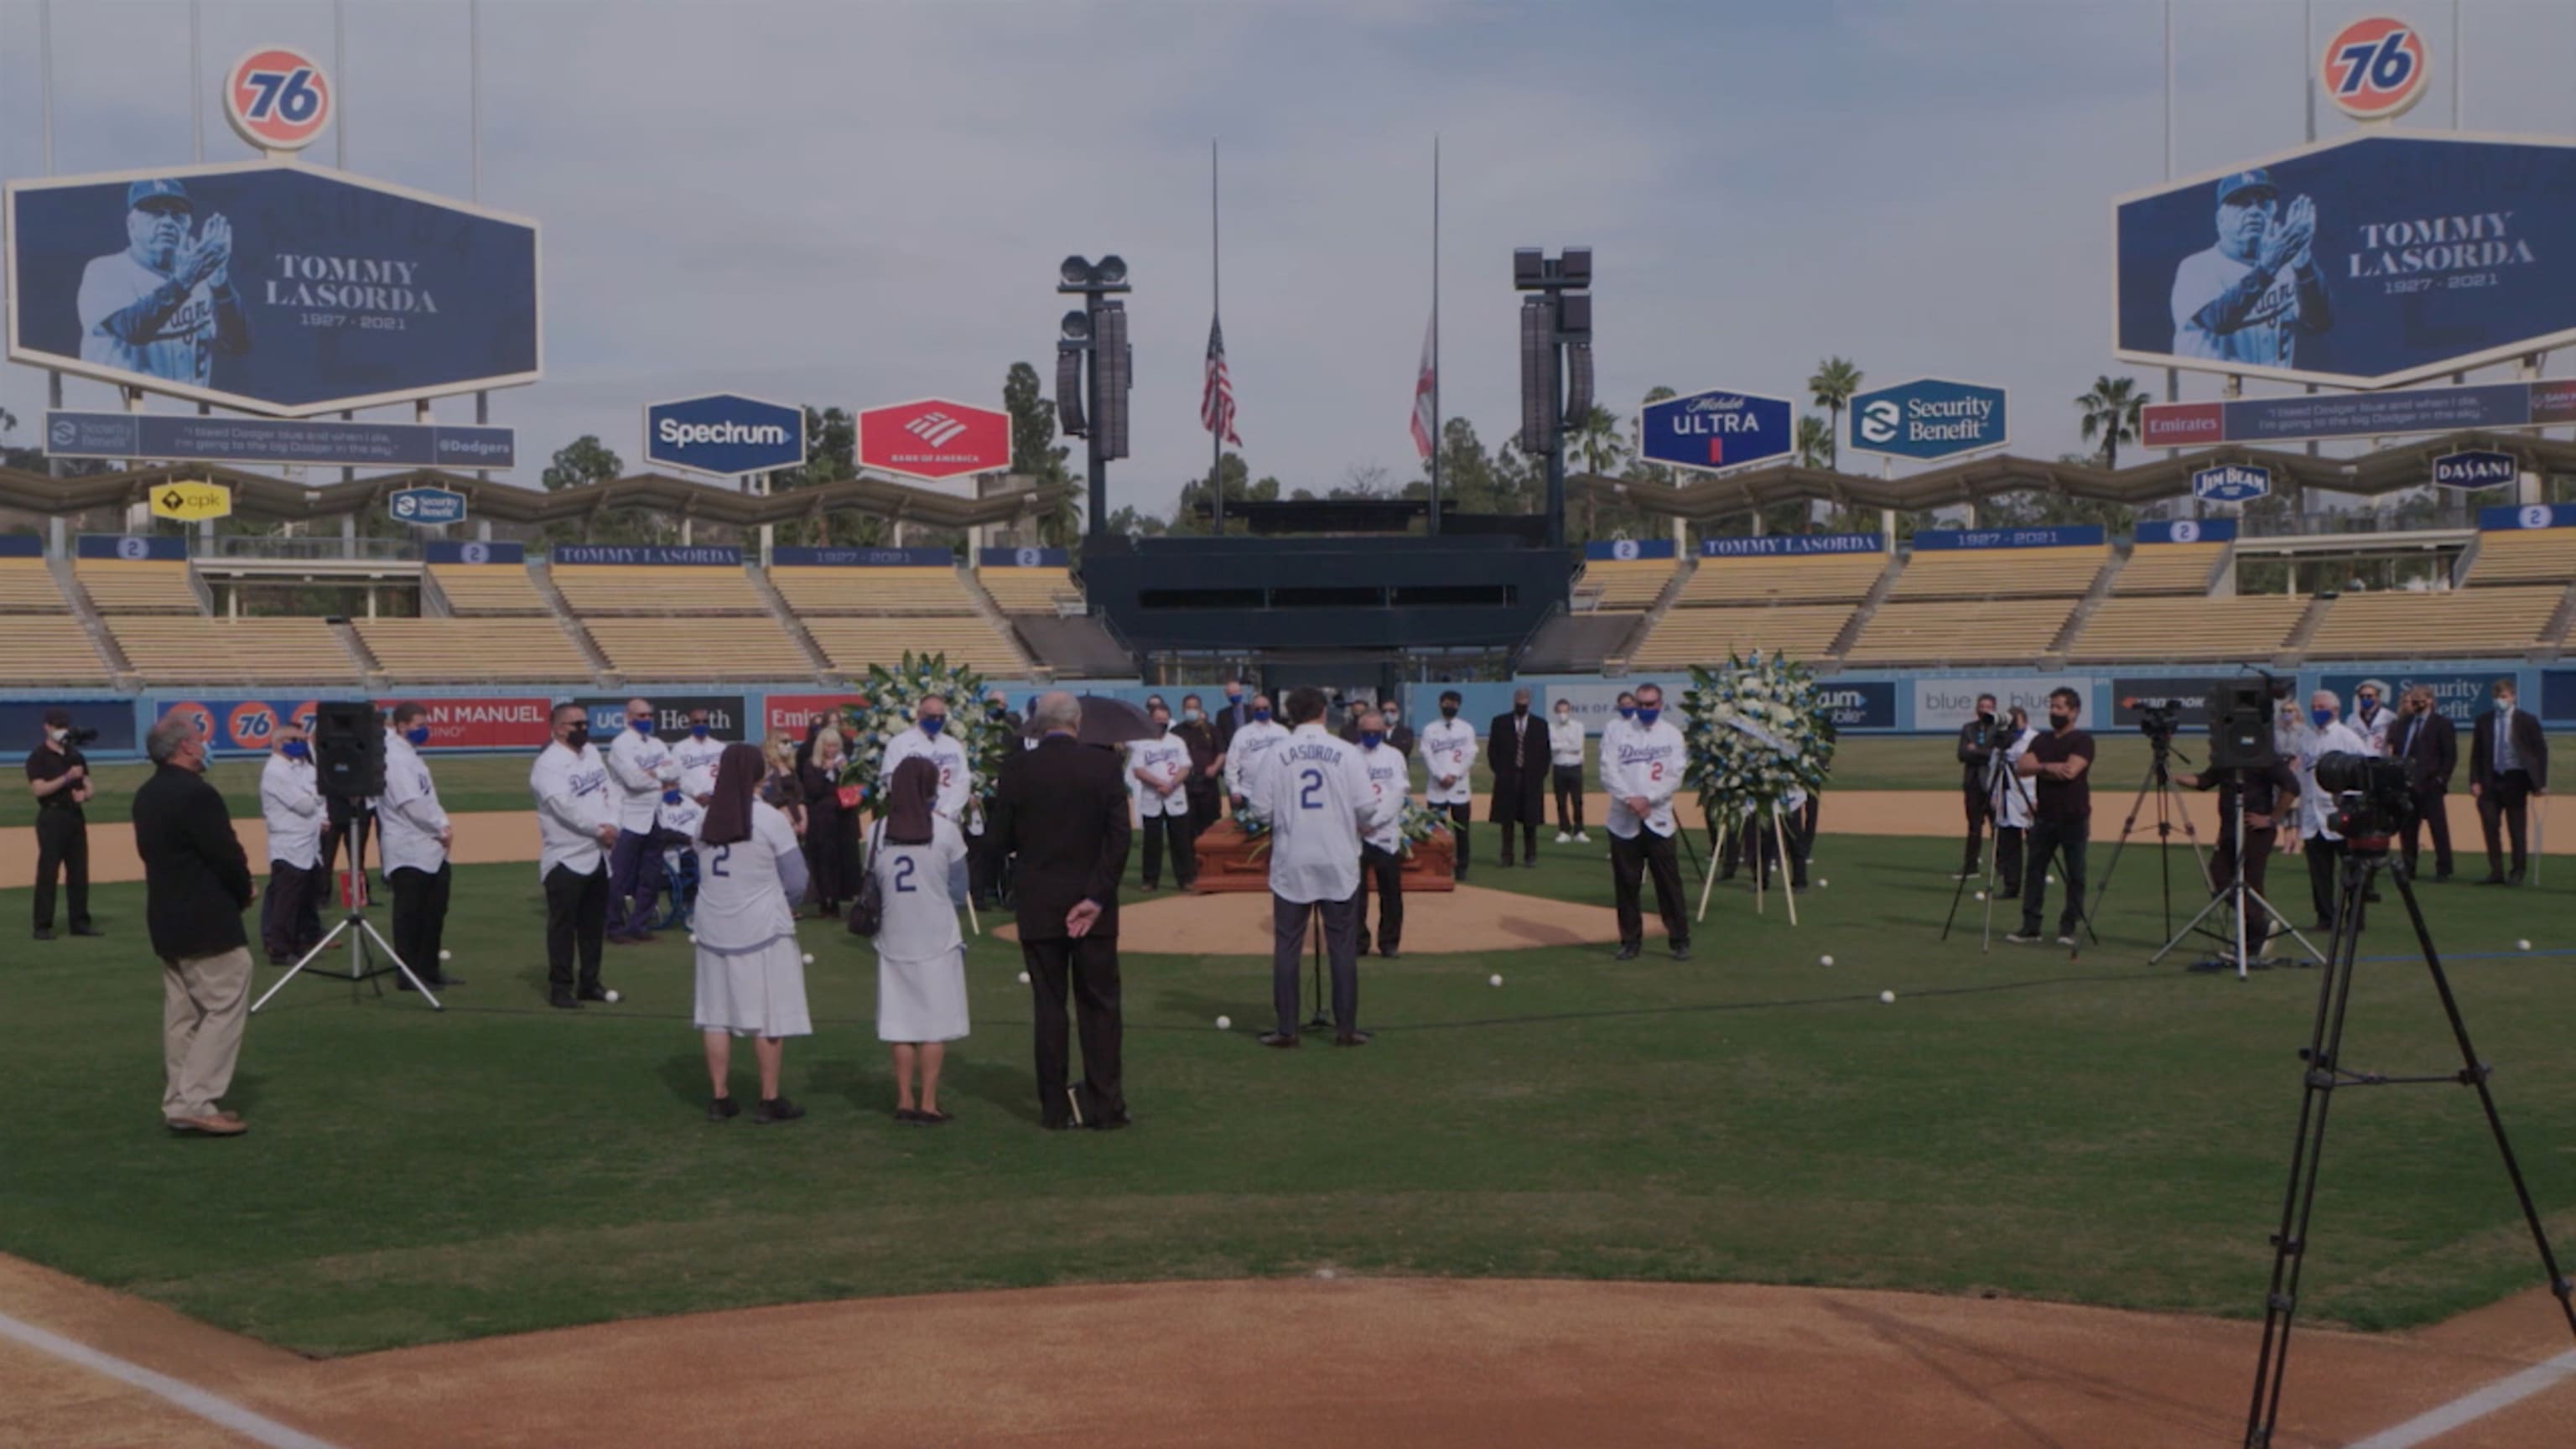 Dodgers pay tribute to Lasorda